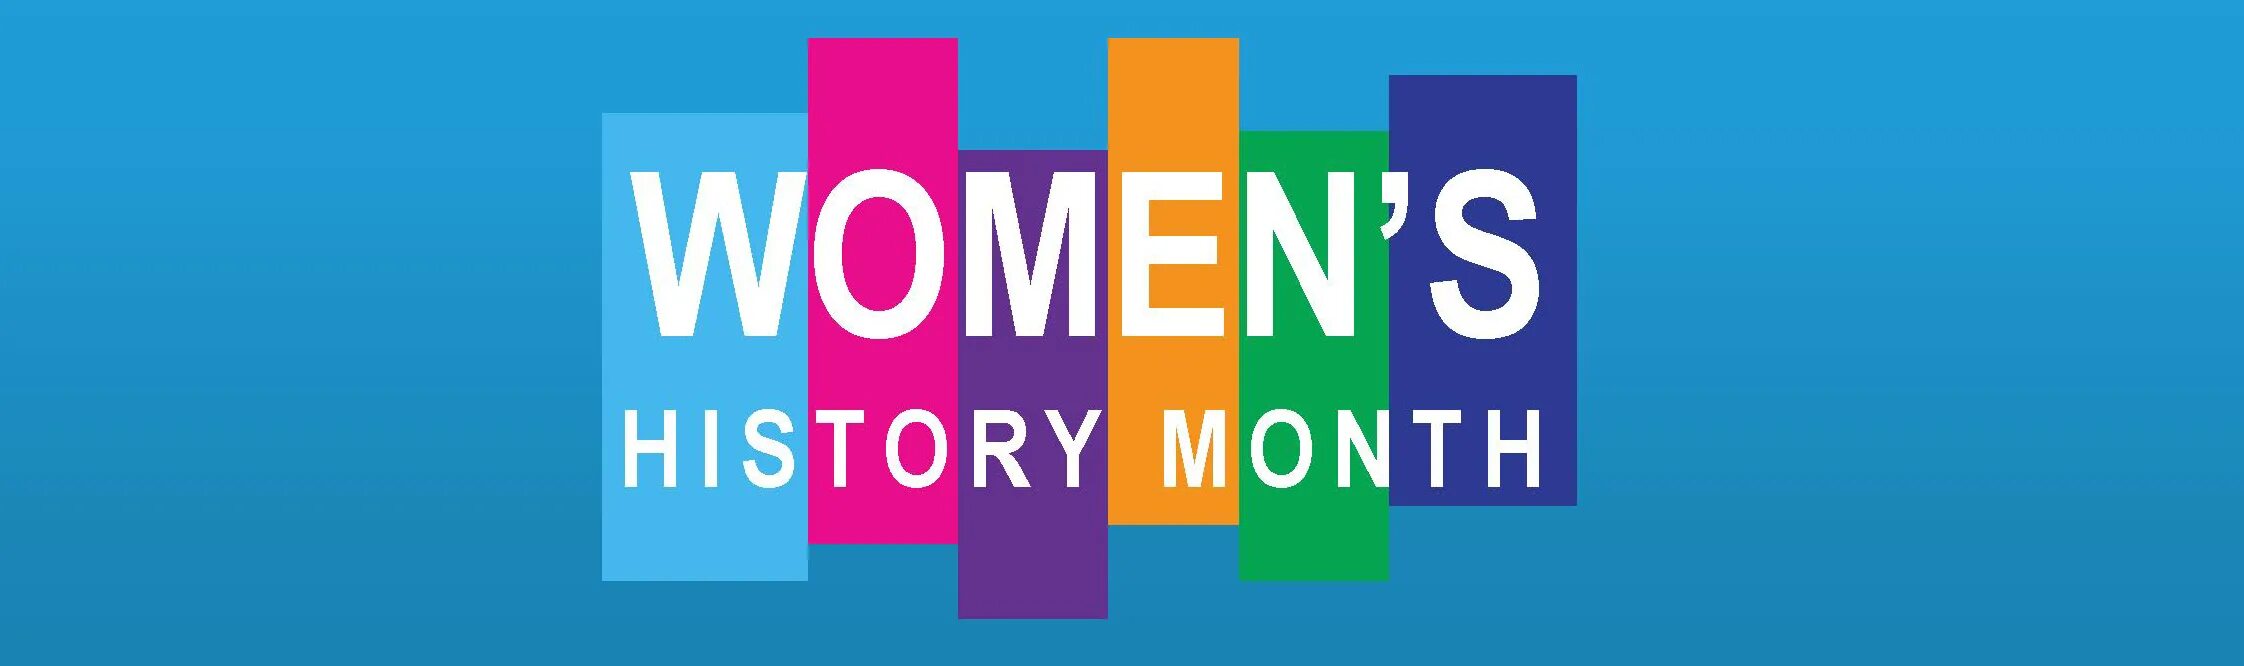 This month s. Womans History month. Women's History month. Newsela women's History month. Women's History month text.